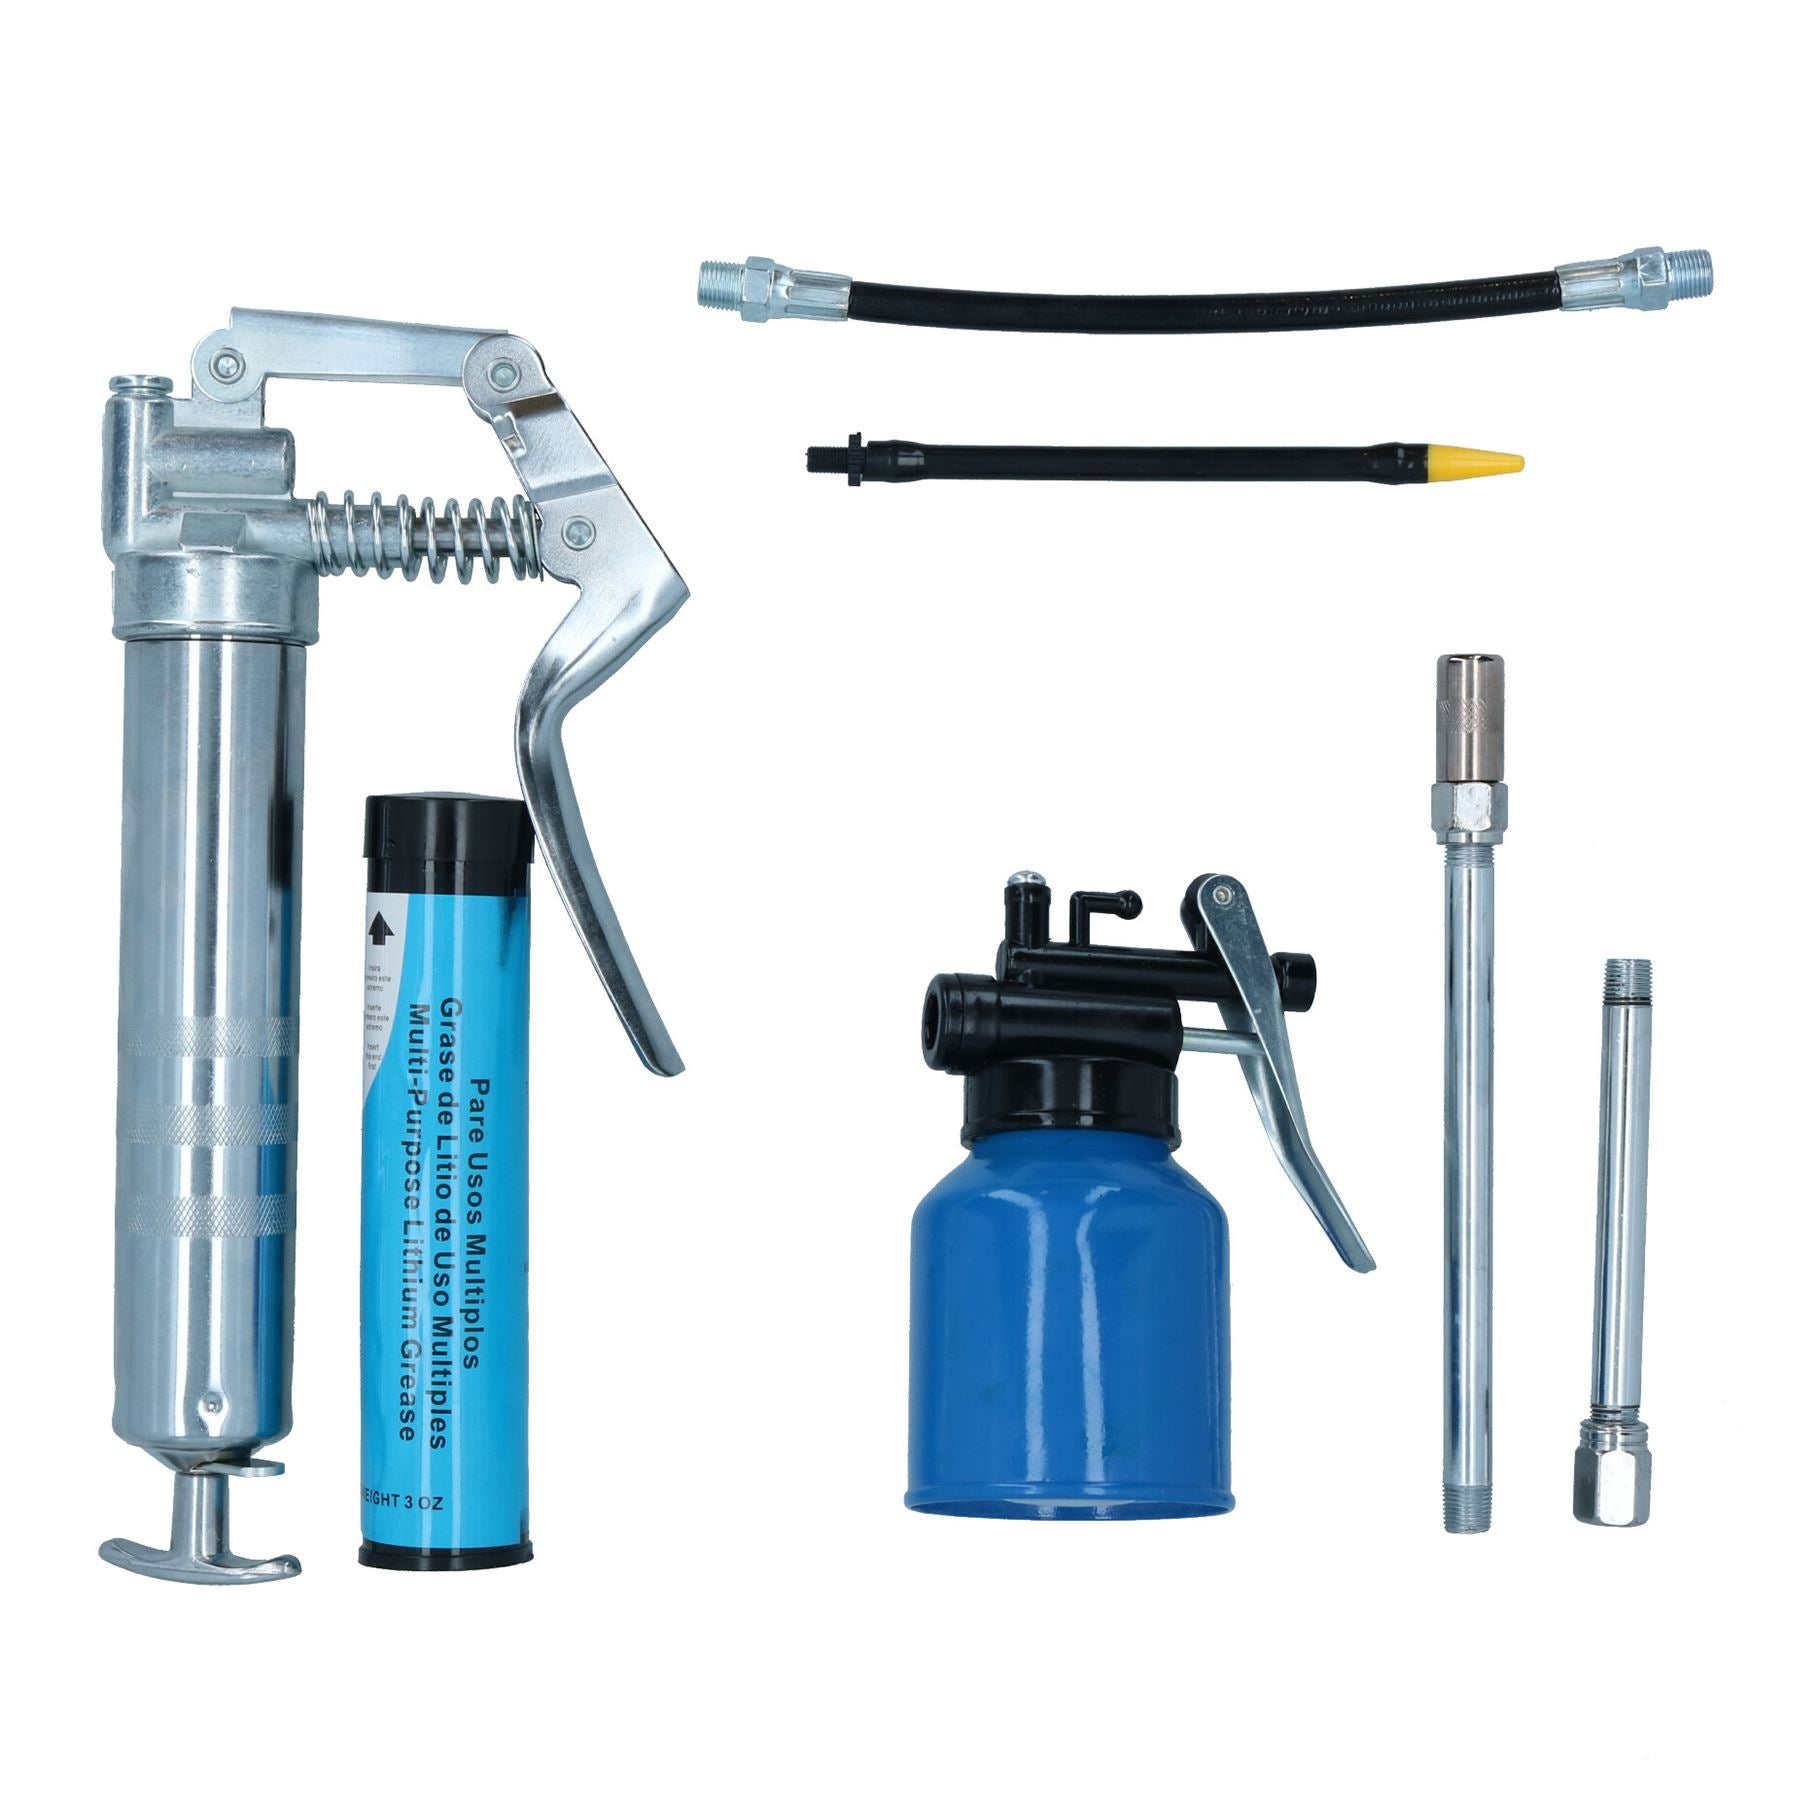 Mini Grease Gun + Oil Can With Flexible + Rigid Nozzles and 3oz Grease 5pc Kit